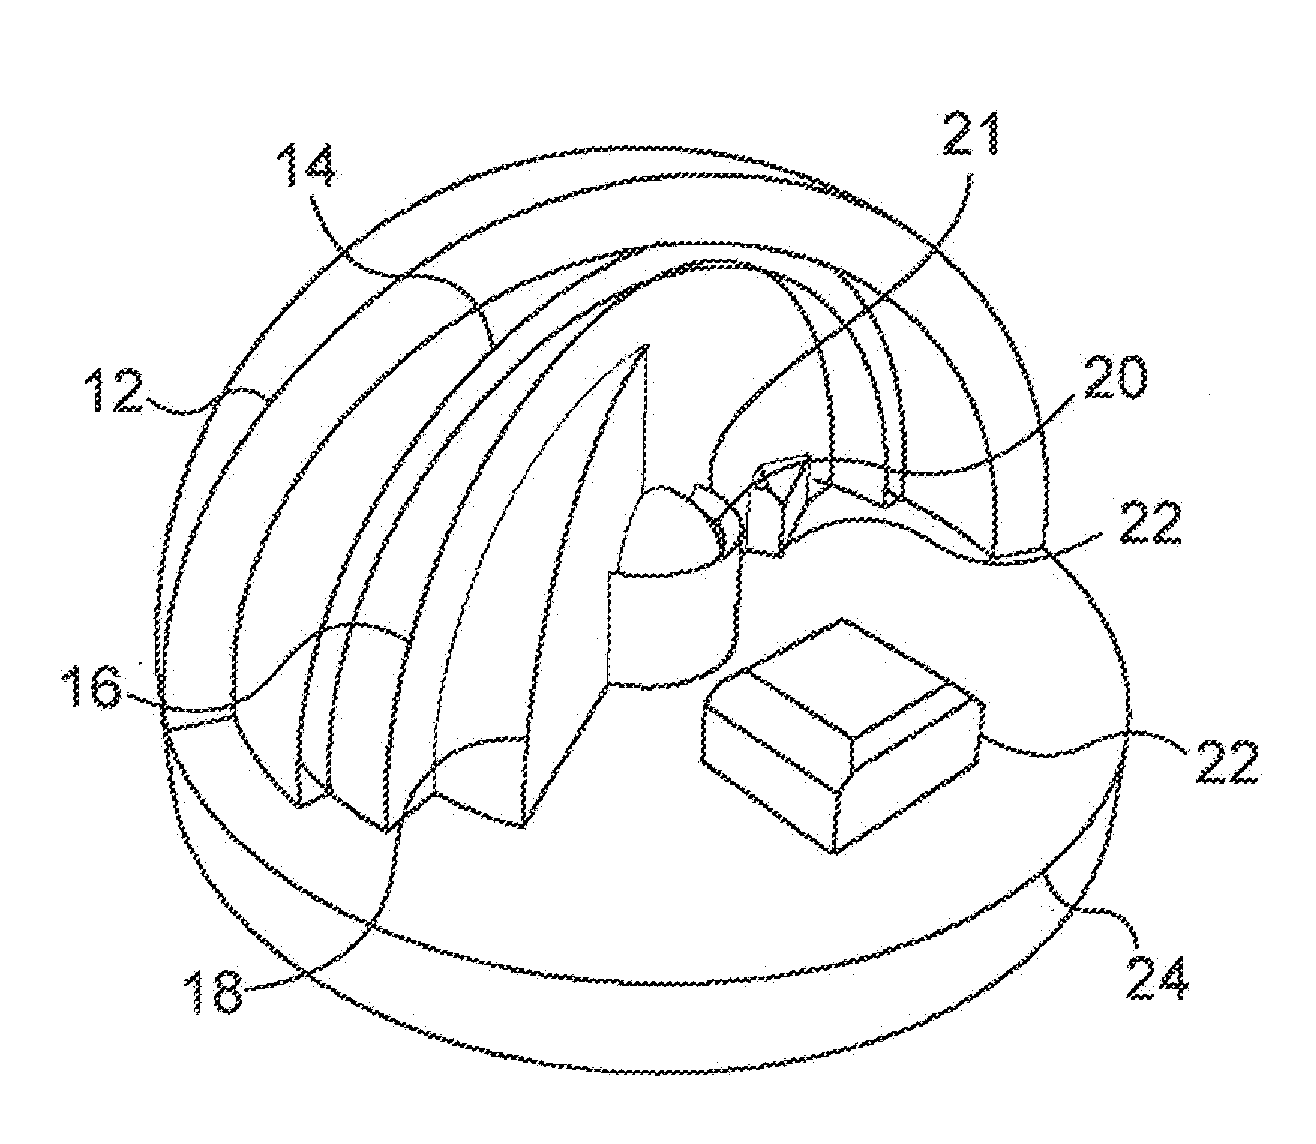 Electrically Insulated Screen and Method of Erecting an Electrically Insulated Screen